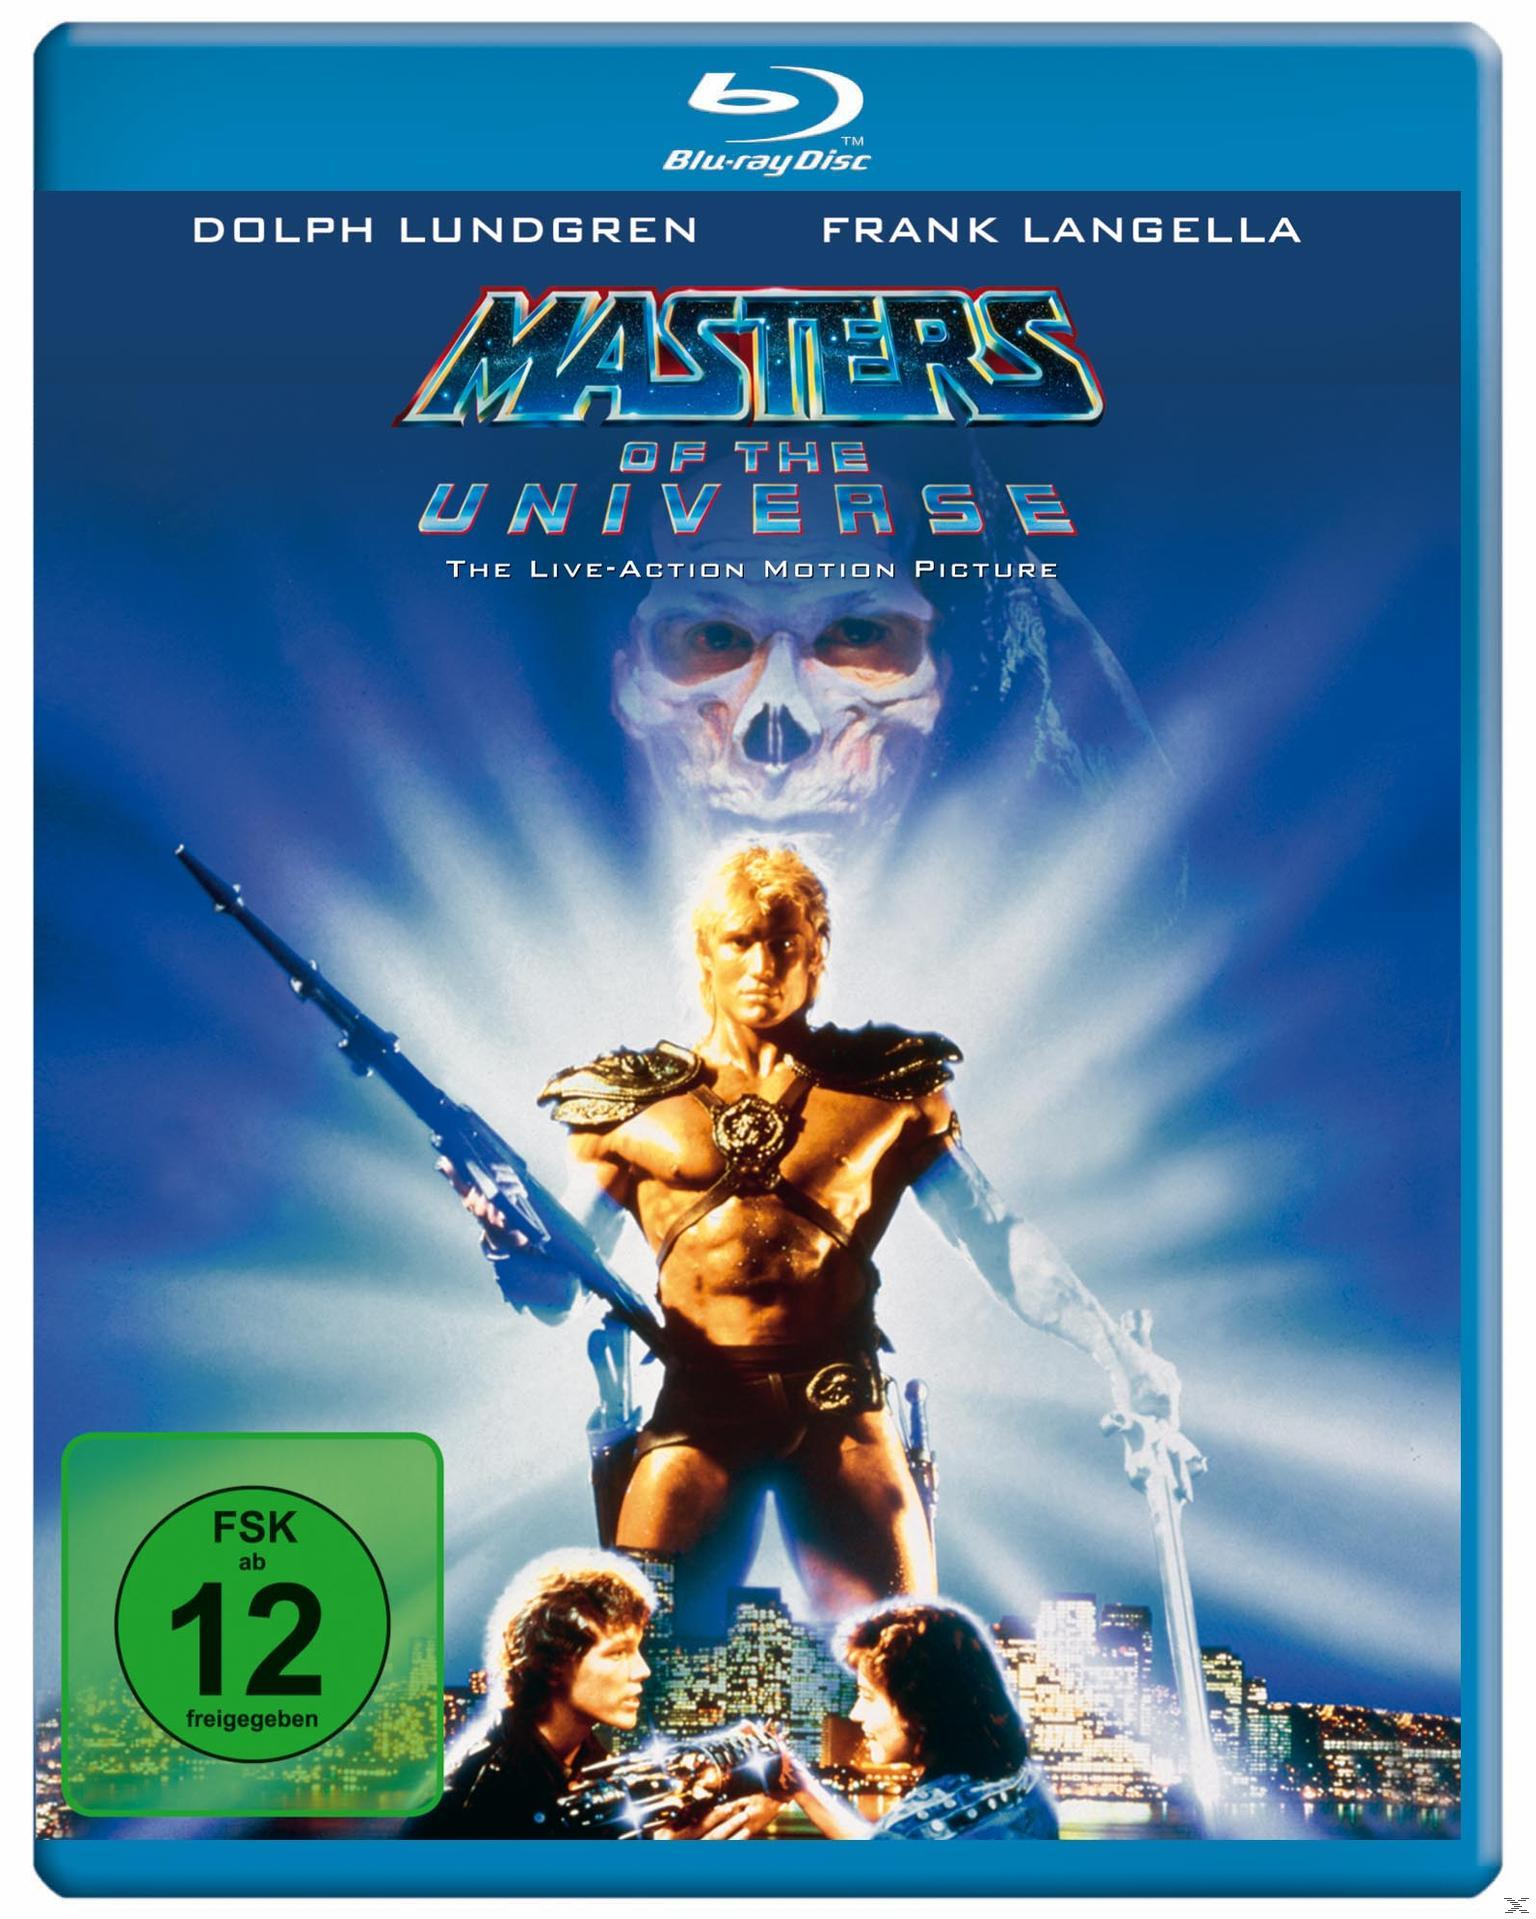 DVD the Masters Universe of